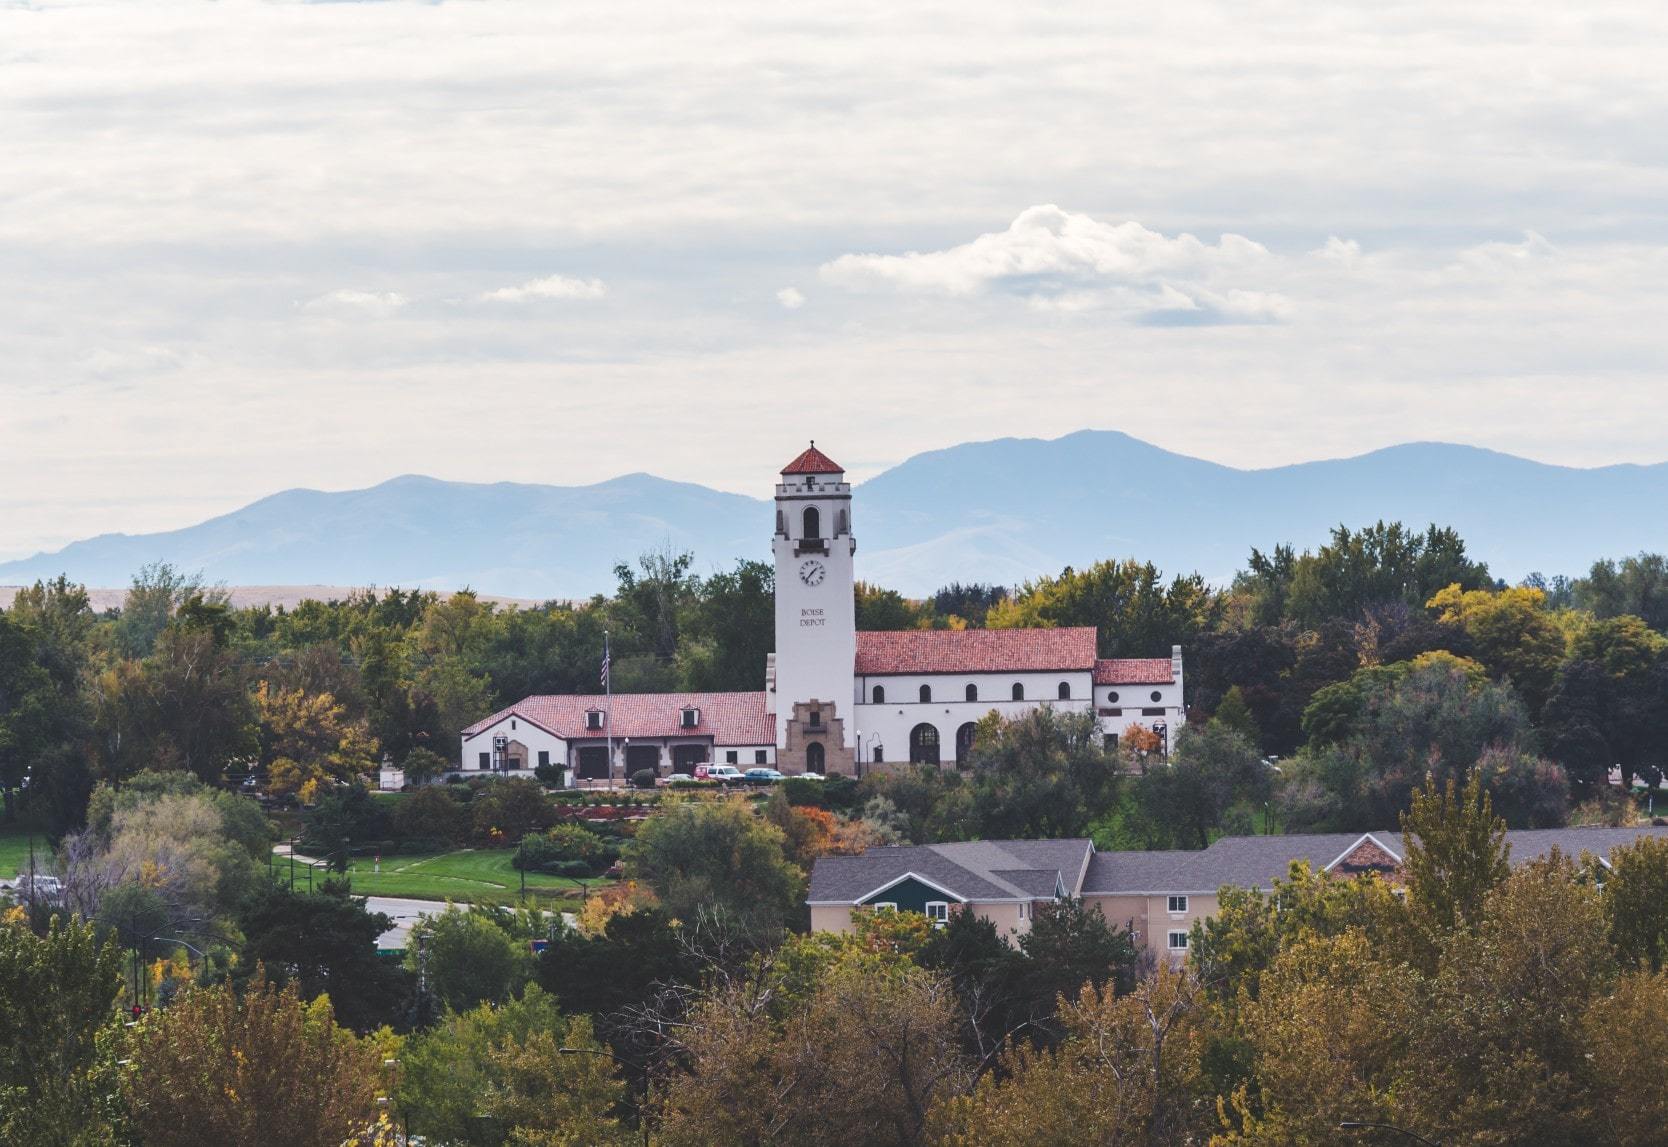 View of Boise Depot historic train station in Boise Bench, Idaho